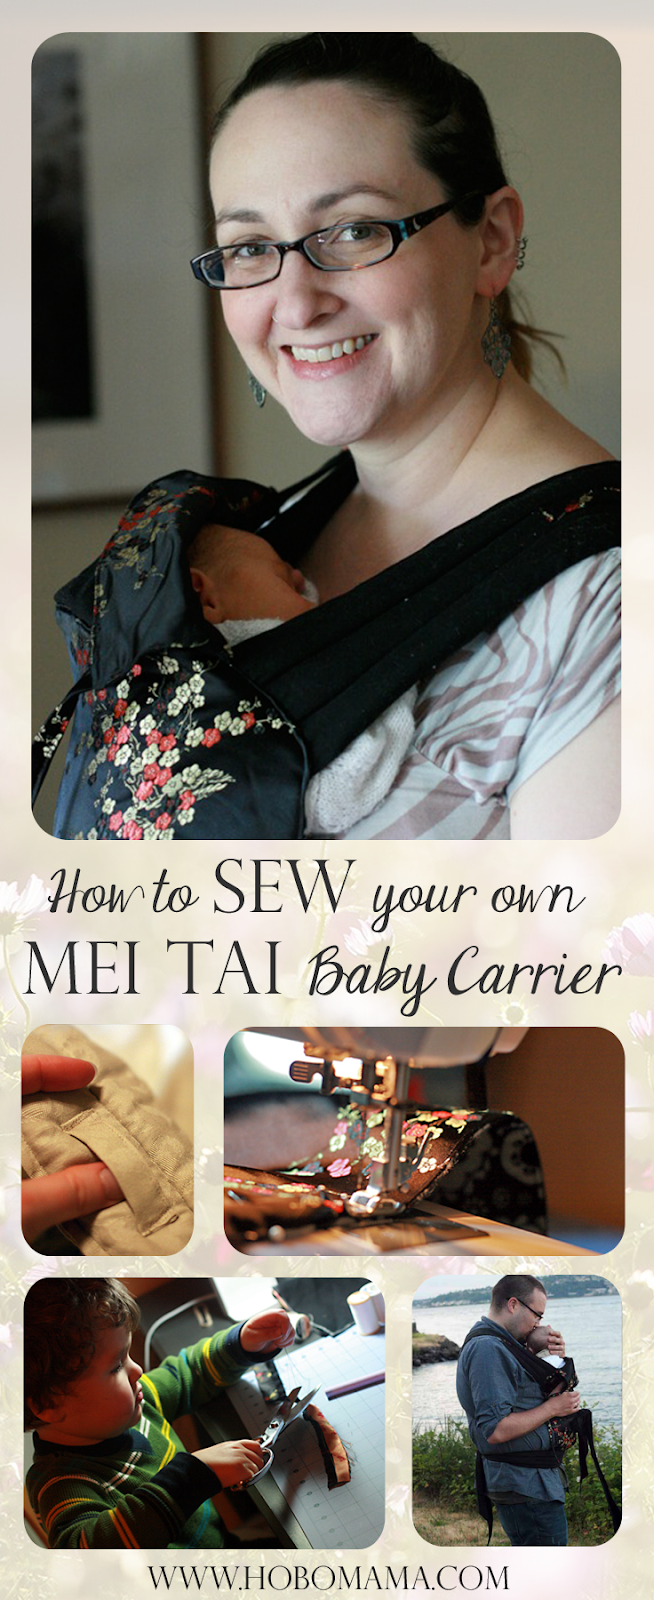 How to sew a mei tai baby carrier - How to sew a mei tai baby carrier -   15 diy Baby carrier ideas